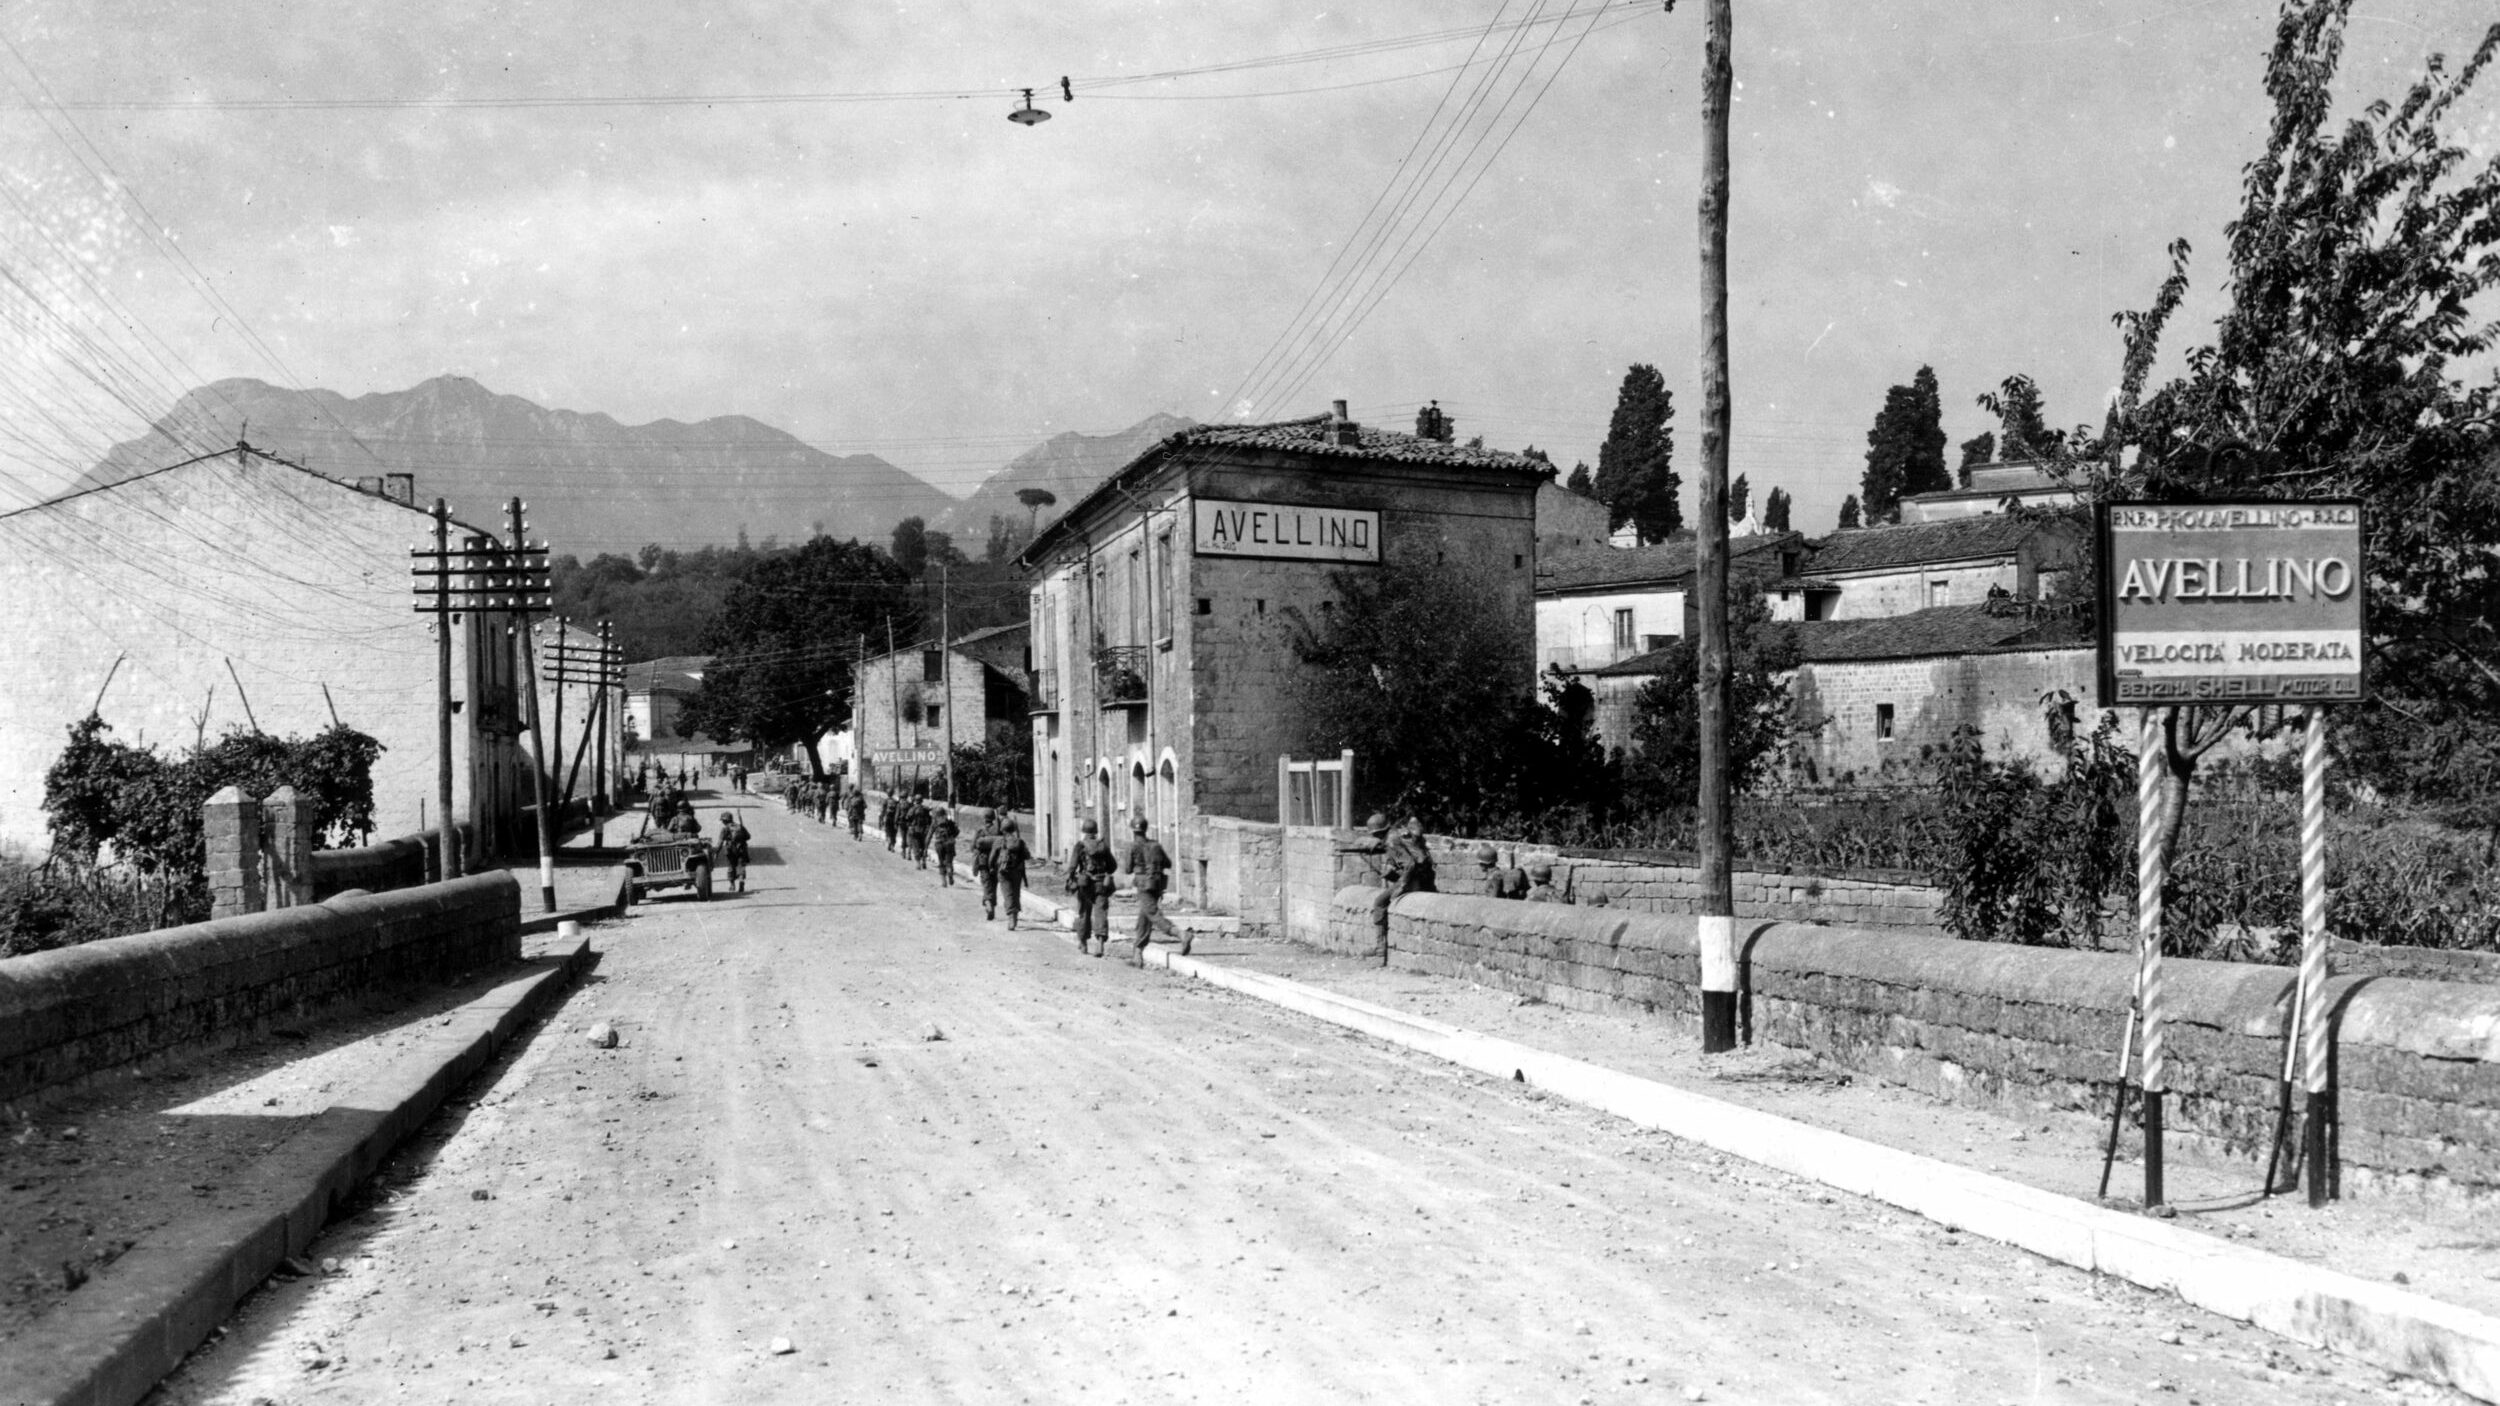  Weeks after the airborne jump of the 509th Parachute Infantry Battalion near Avellino, American soldiers enter the town. The airborne soldiers parachuted near Avellino but were widely dispersed and could not muster the strength to take the town. Colonel Doyle Yardley, battalion commander, was wounded and taken prisoner, spending 16 months as a POW.